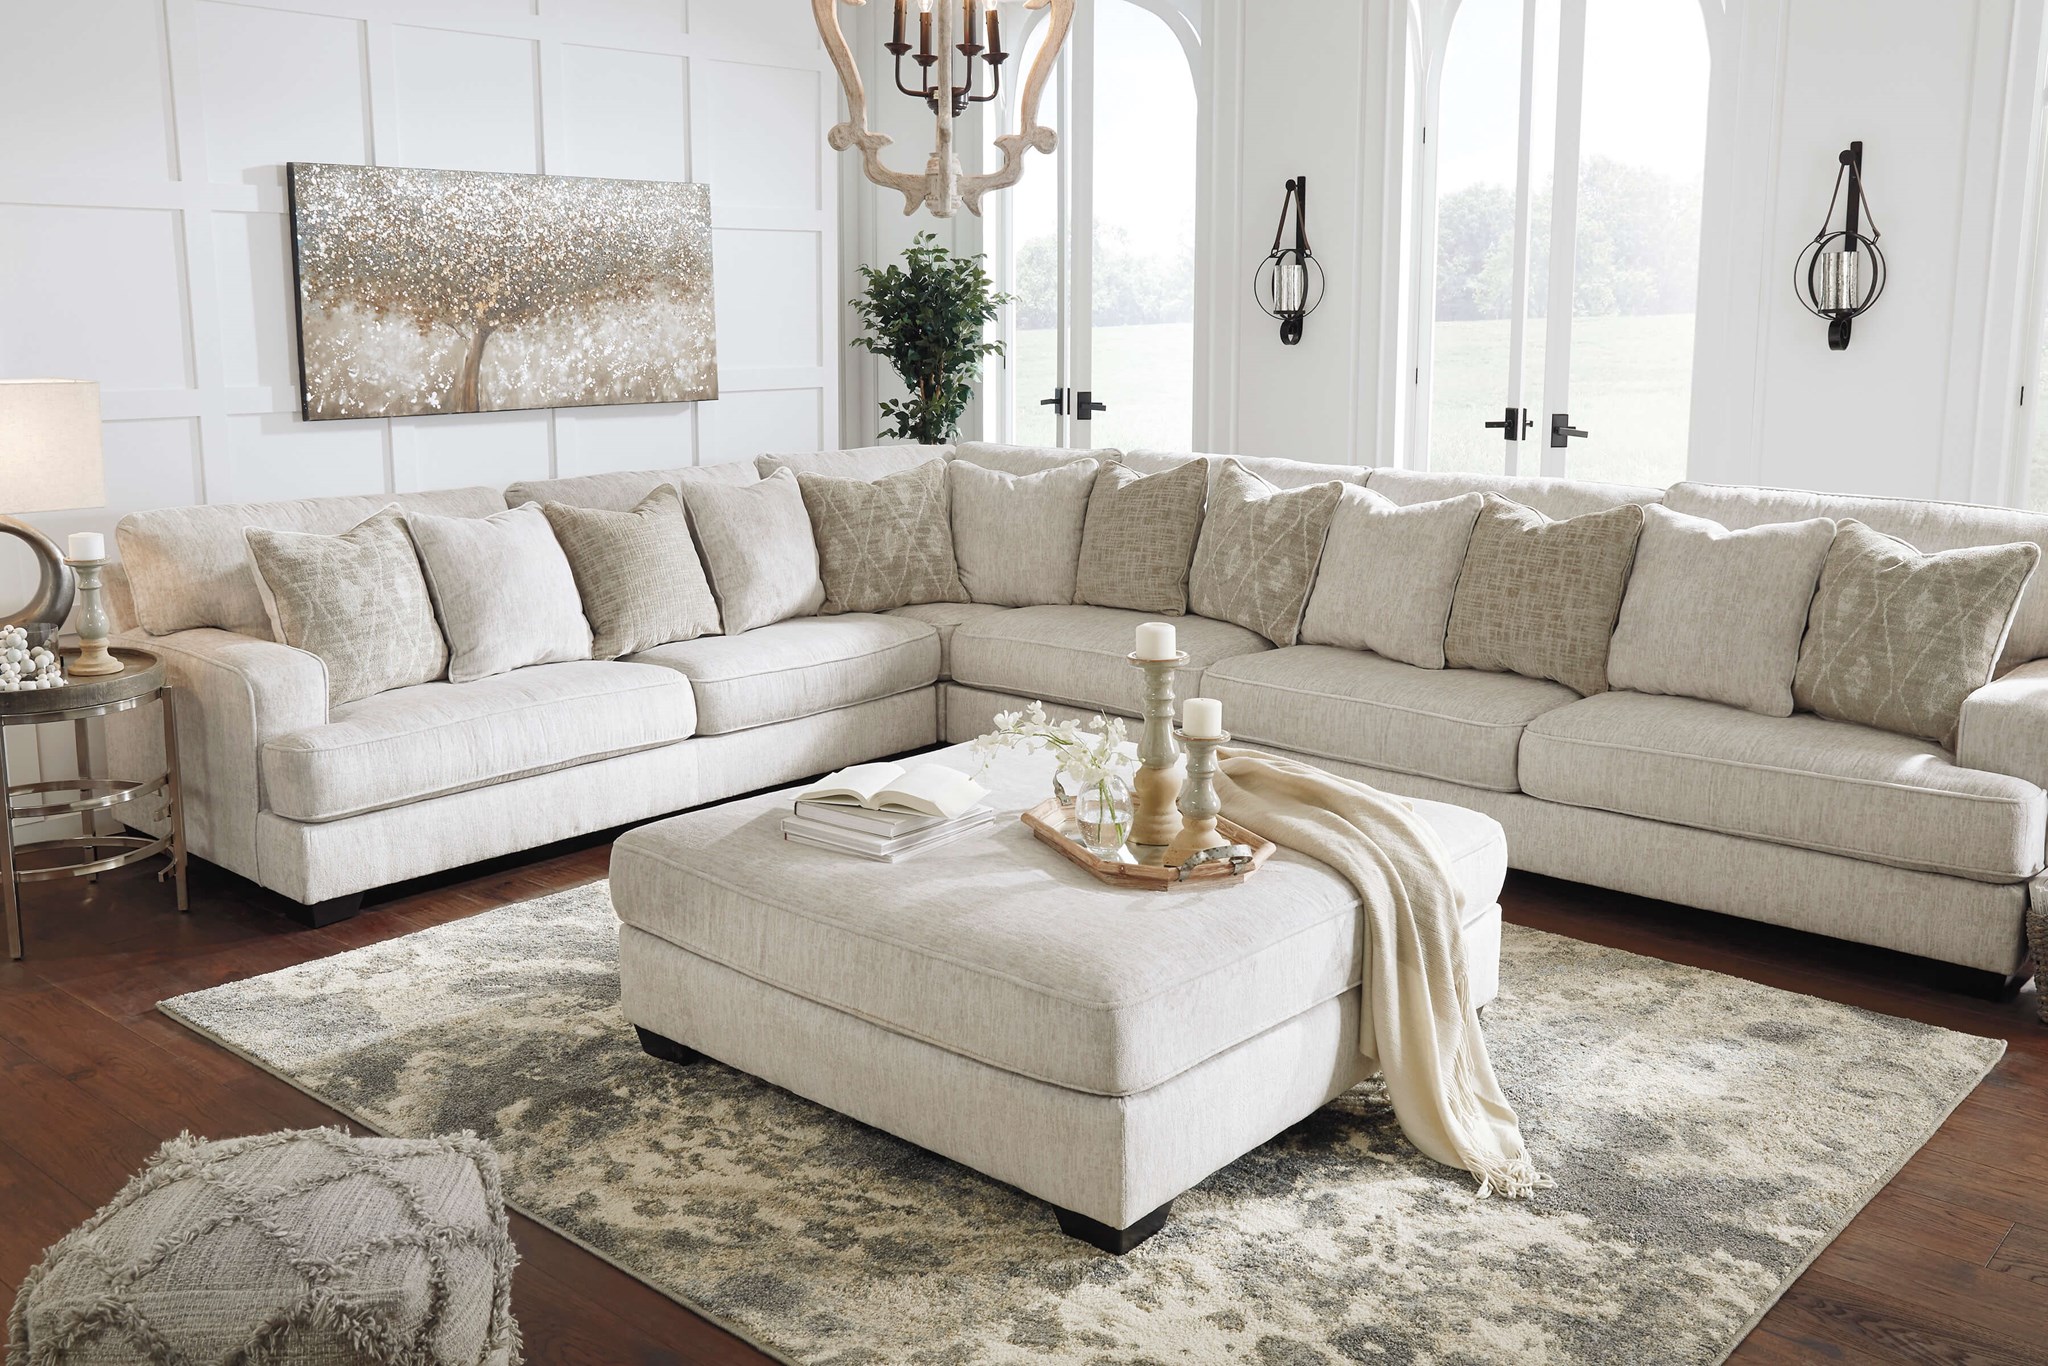 Browse the sectional furniture in Armenia!